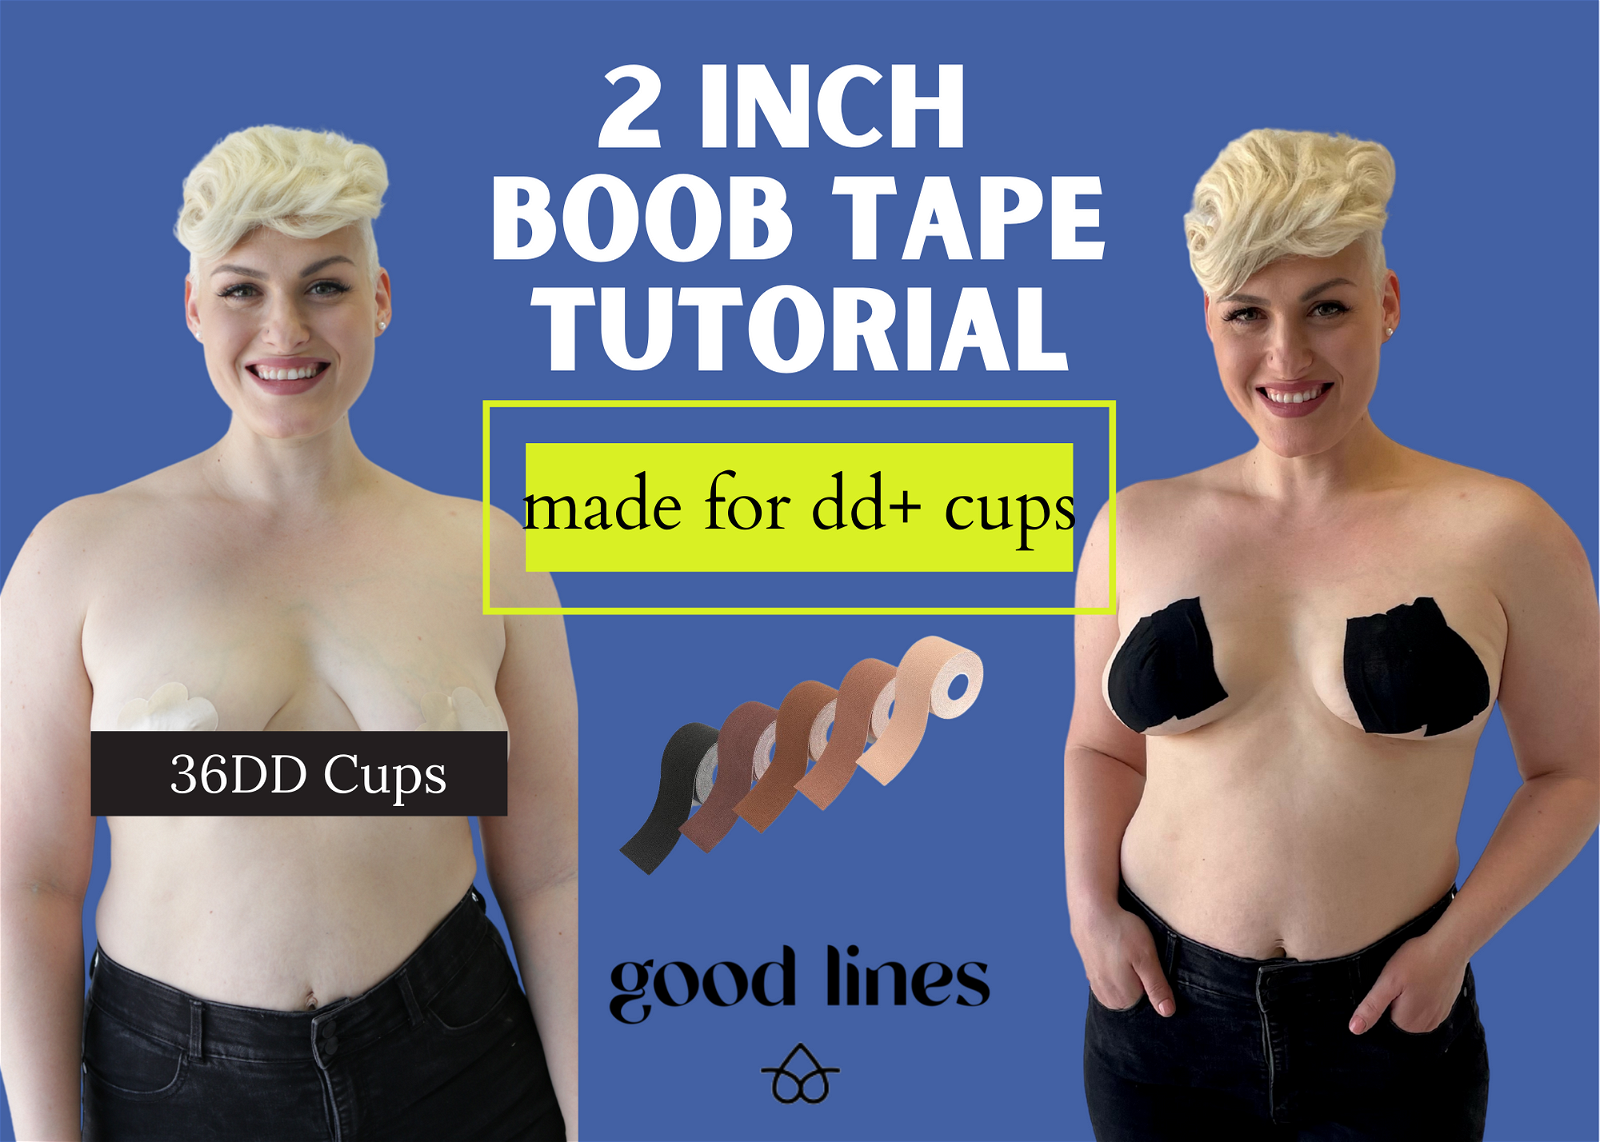 Boob Tape: 5 NEW HOW TO WEAR VIDEOS!